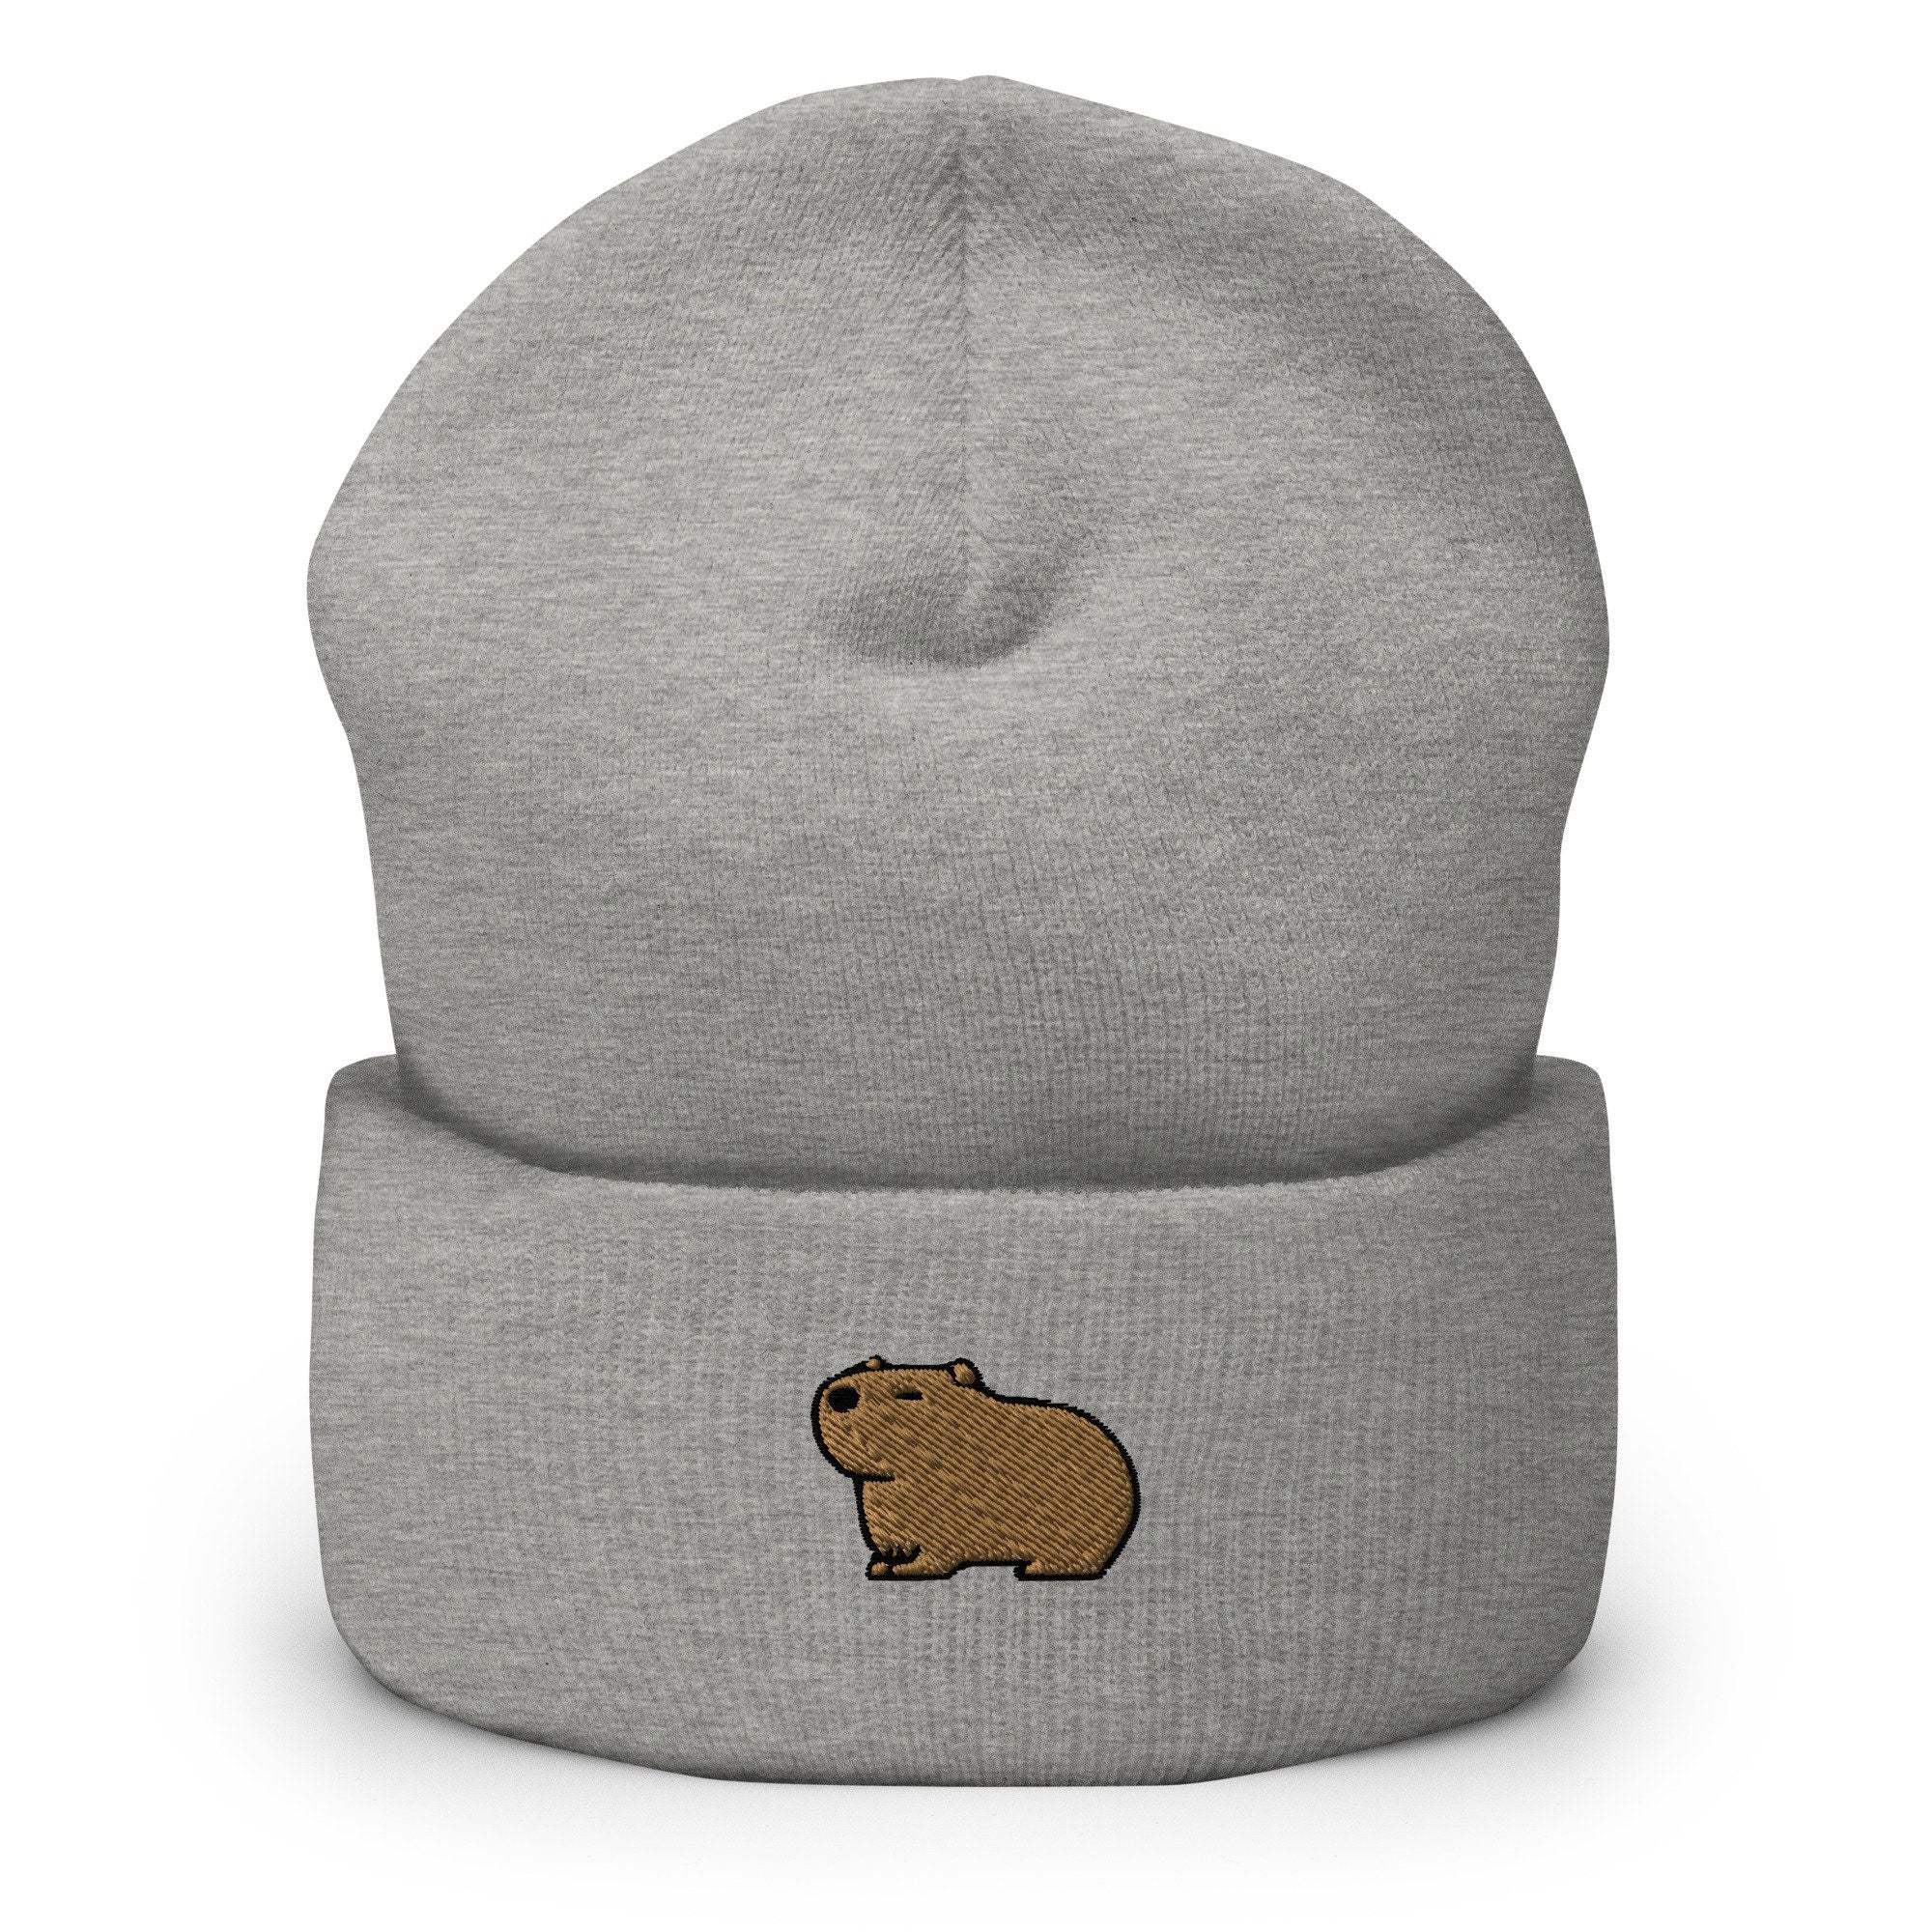 Capybara Embroidered Beanie, Handmade Cuffed Knit Unisex Slouchy Adult Winter Hat Cap Gift